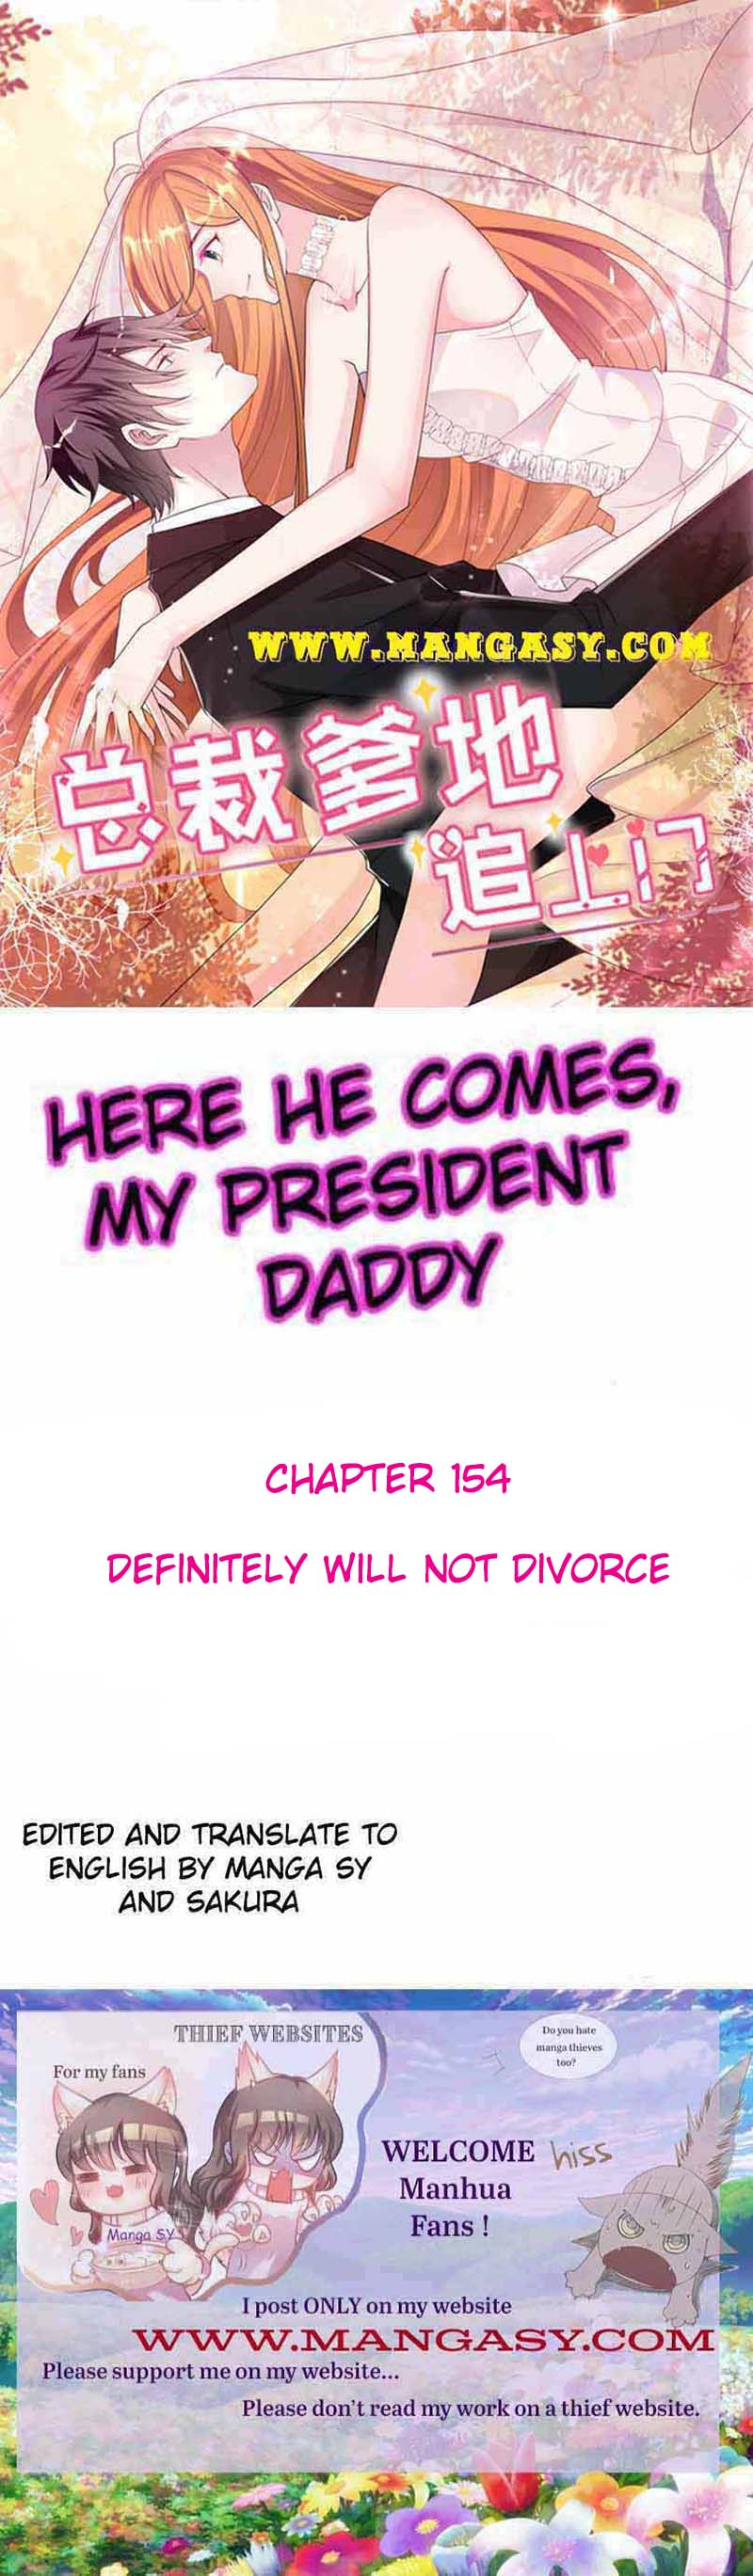 President daddy is chasing you Chapter 154 - page 1